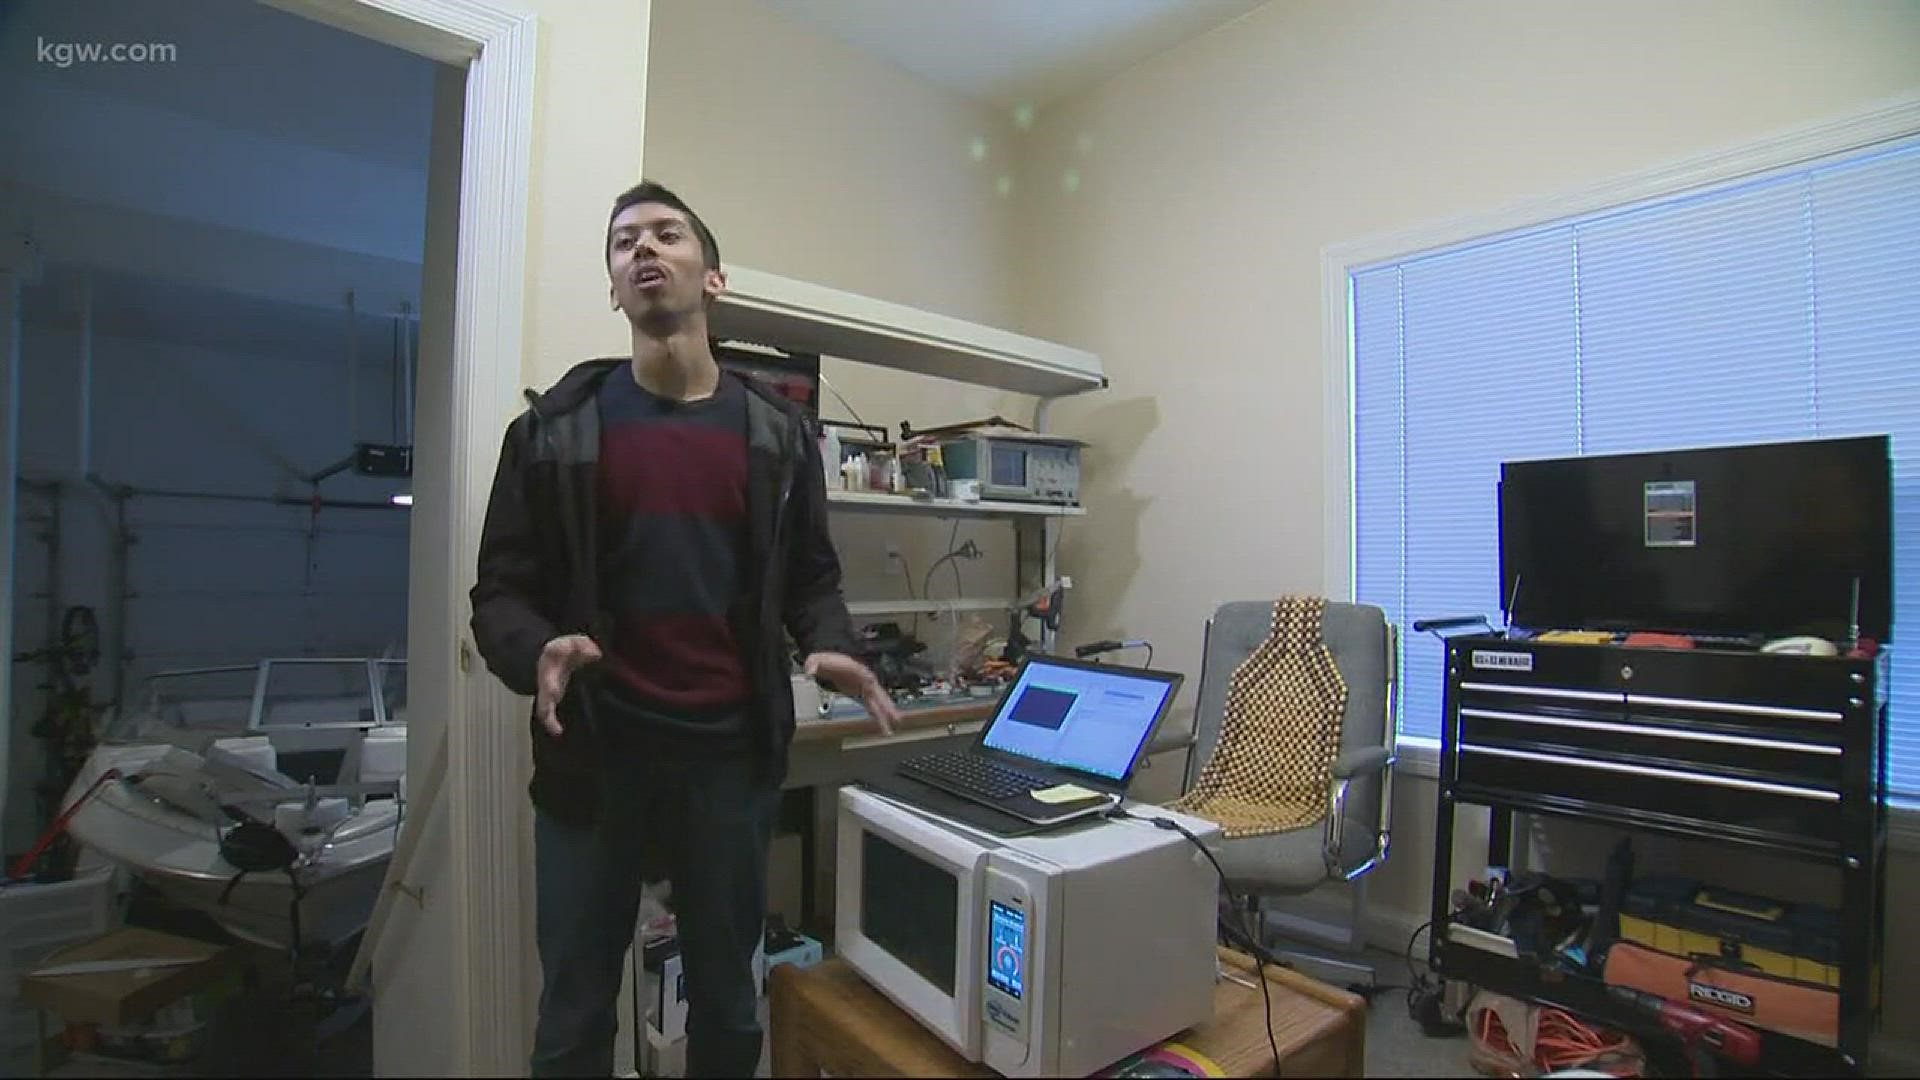 A local teen's invention won big in a science competition.